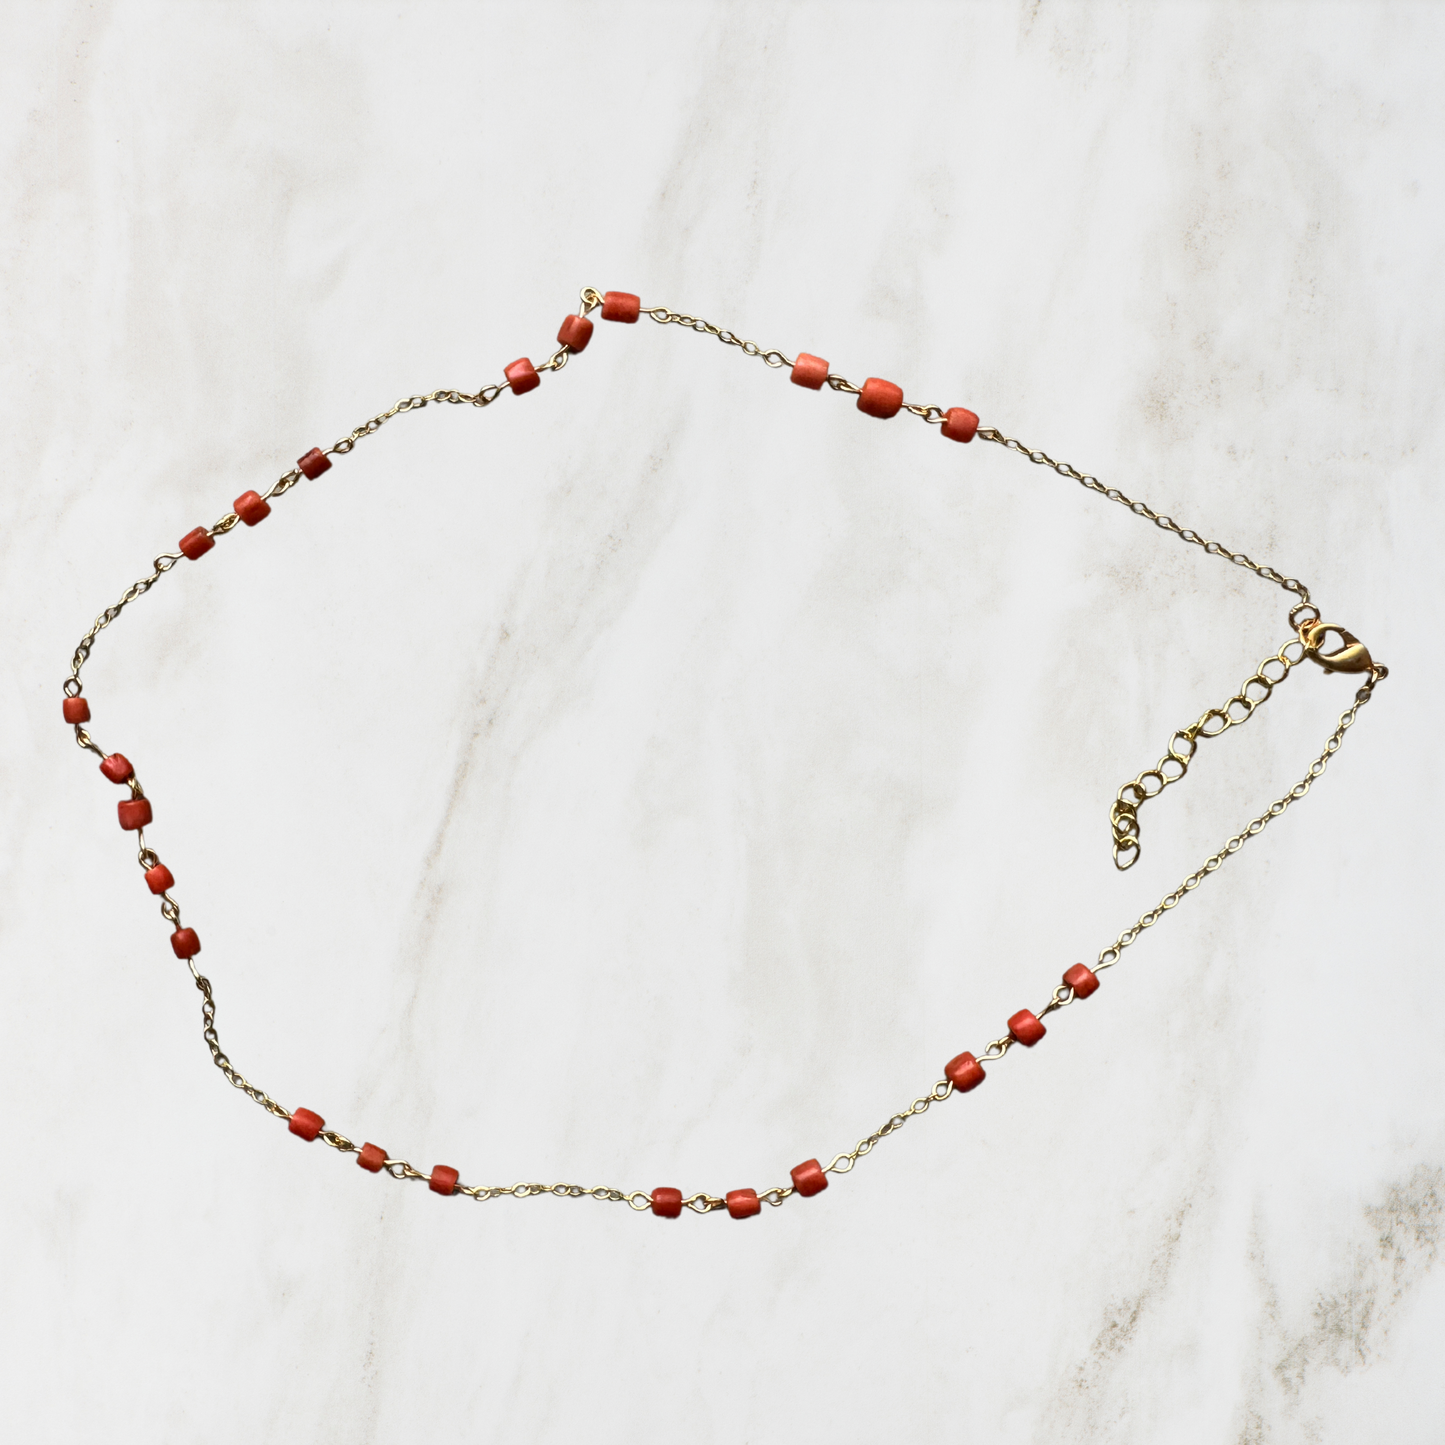 Delicate Coral Beads on Gold Chain Necklace